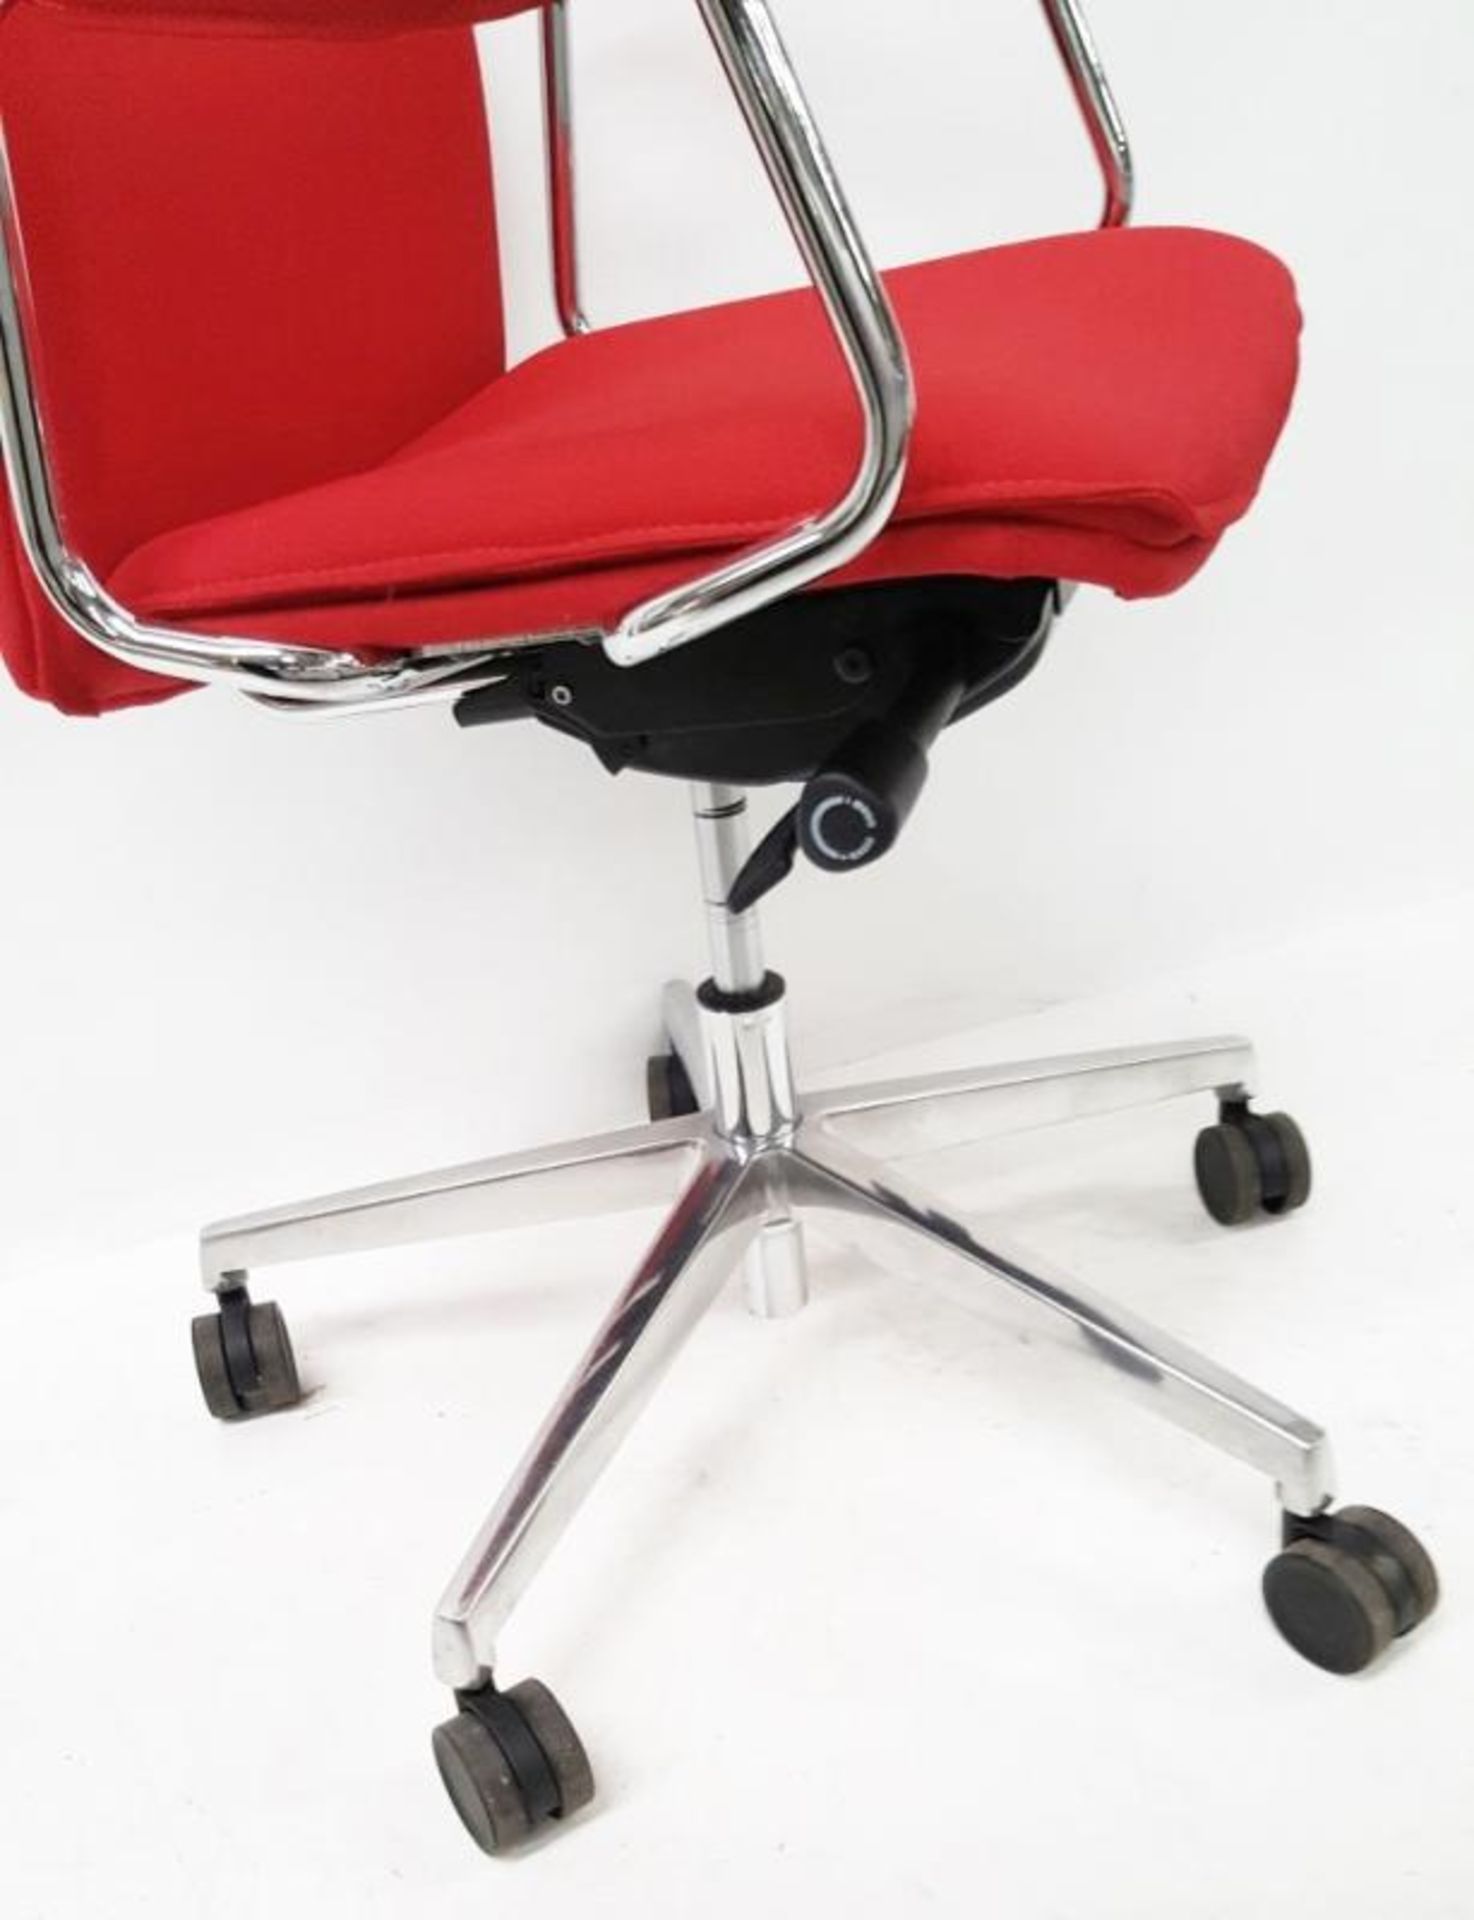 4 x 'Sven Christiansen' Premium Designer High-back Office Chairs In Red (HBB1HA) - Used, In Very Goo - Image 2 of 8